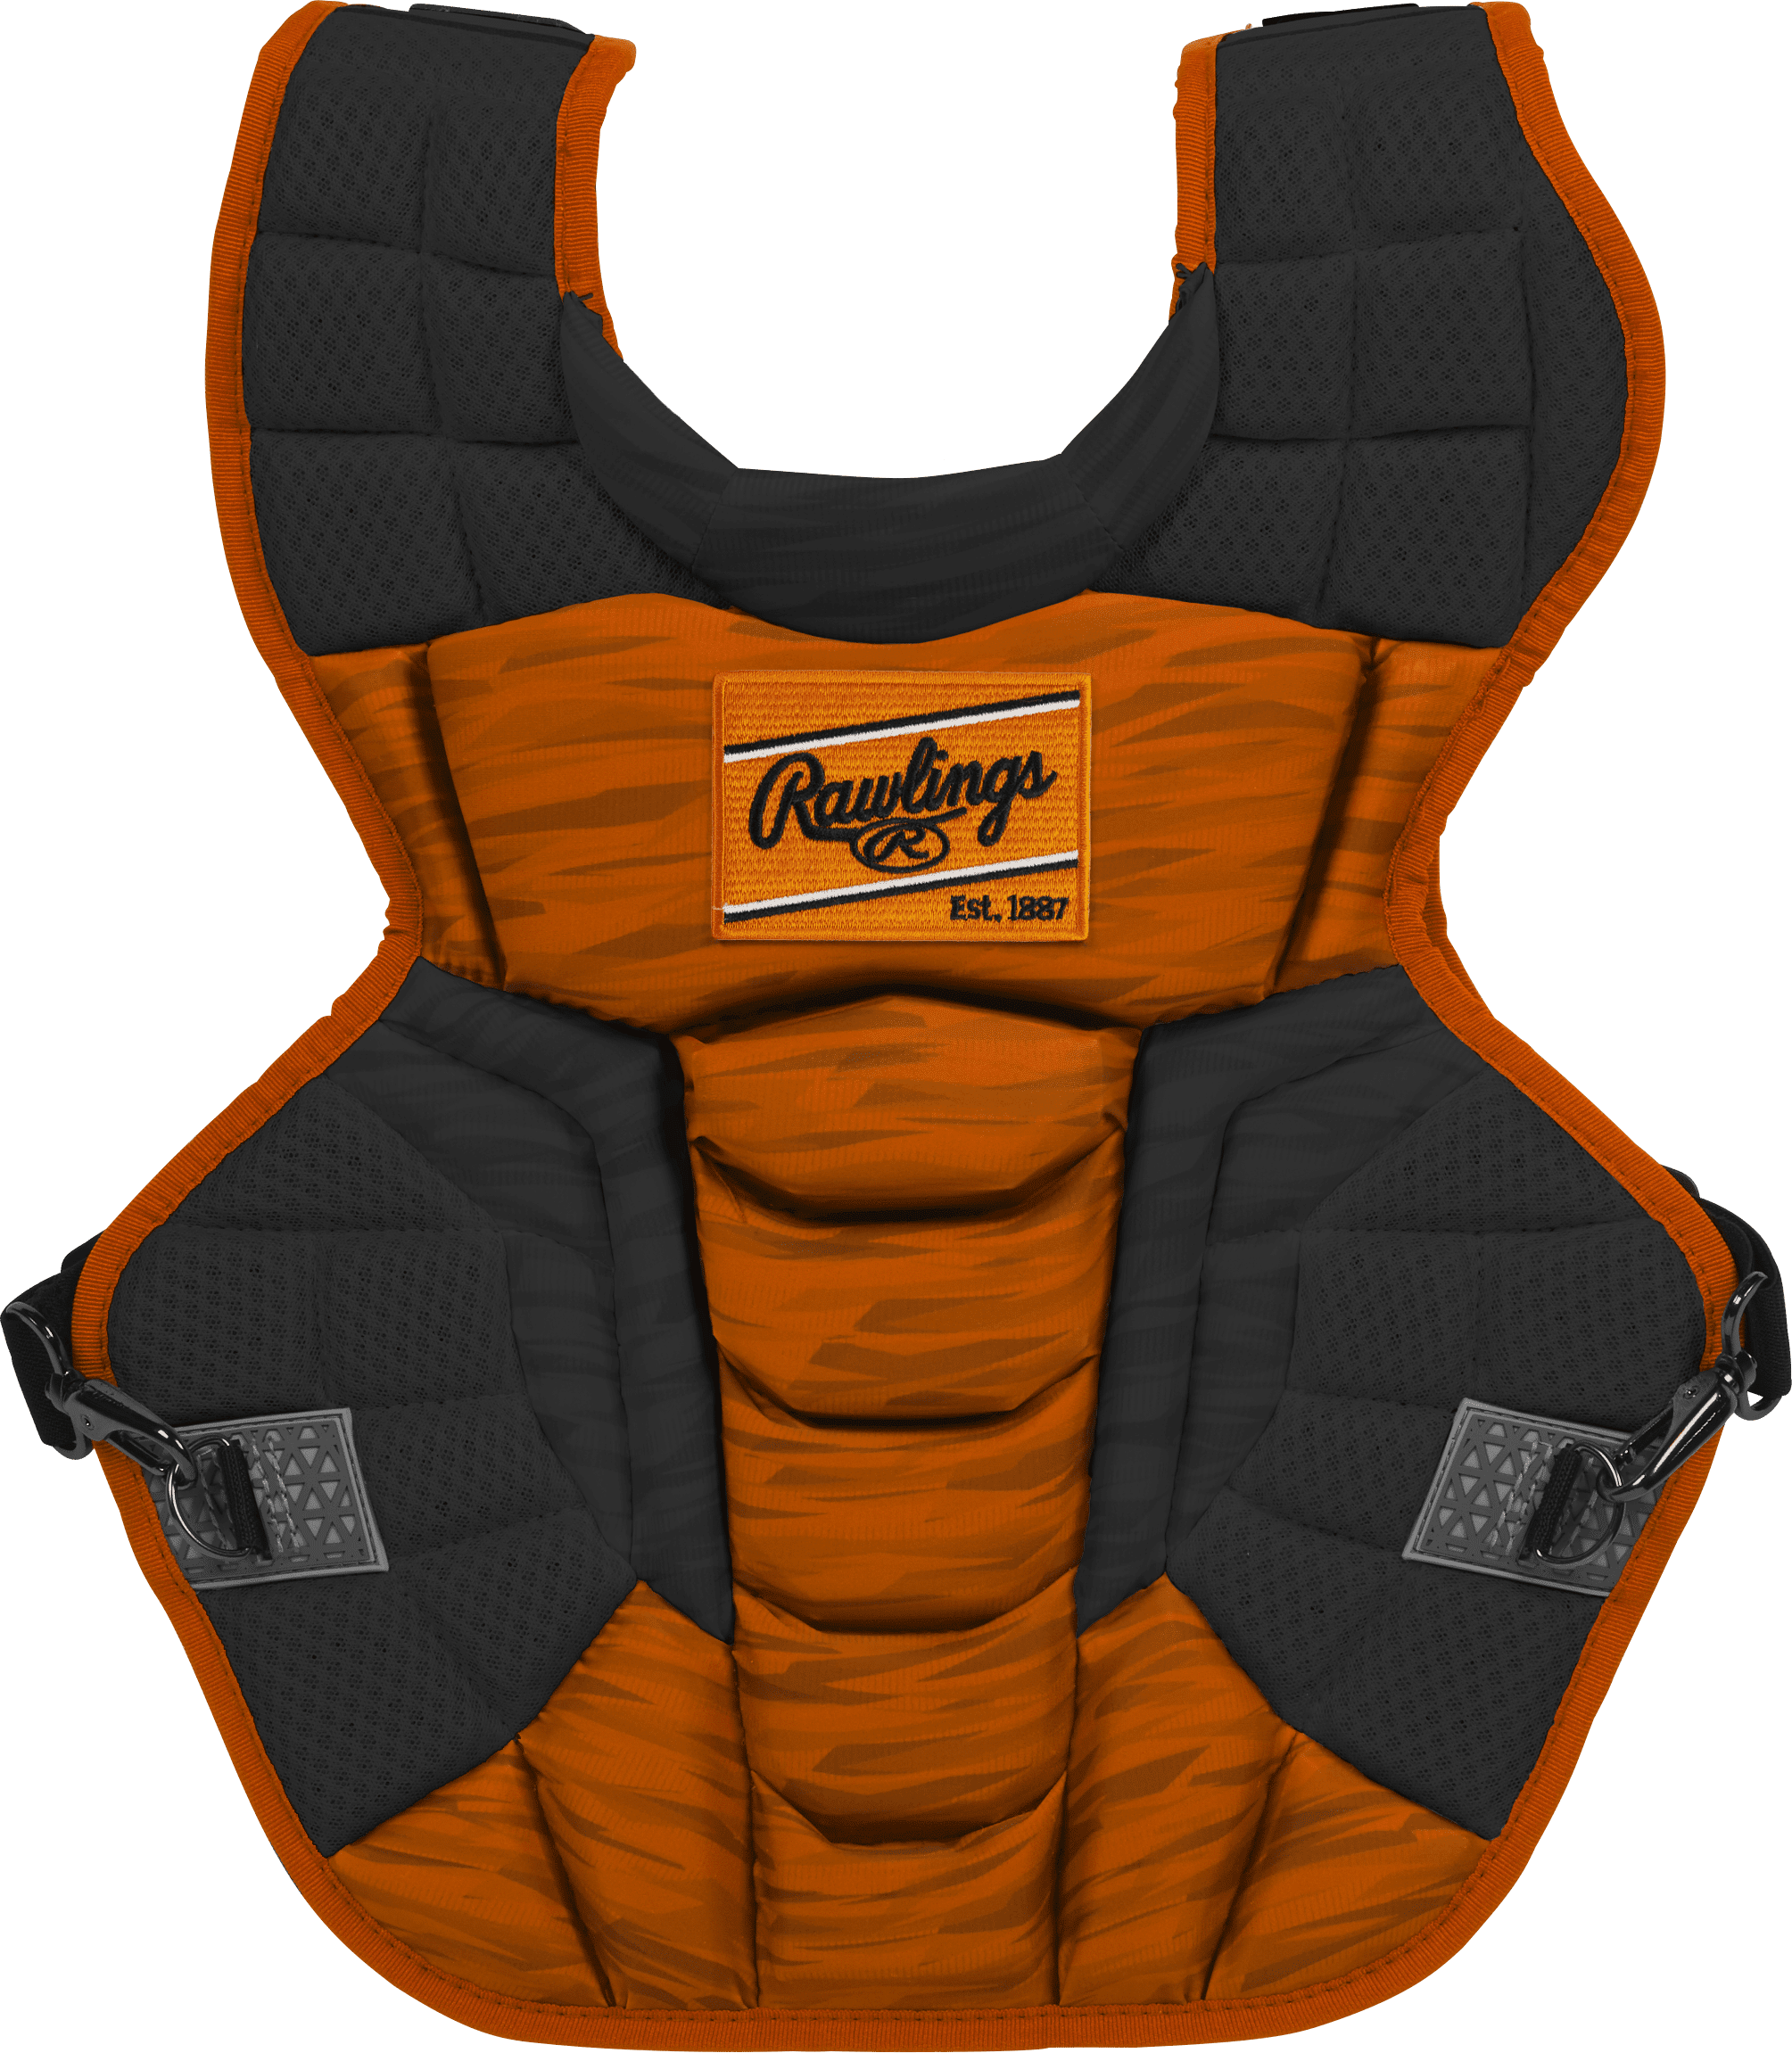 Details about   PRONINE CP13   BASEBALL/SOFTBALL CATCHERS CHEST PROTECTOR VARIOUS 1 COLOR DESIGN 